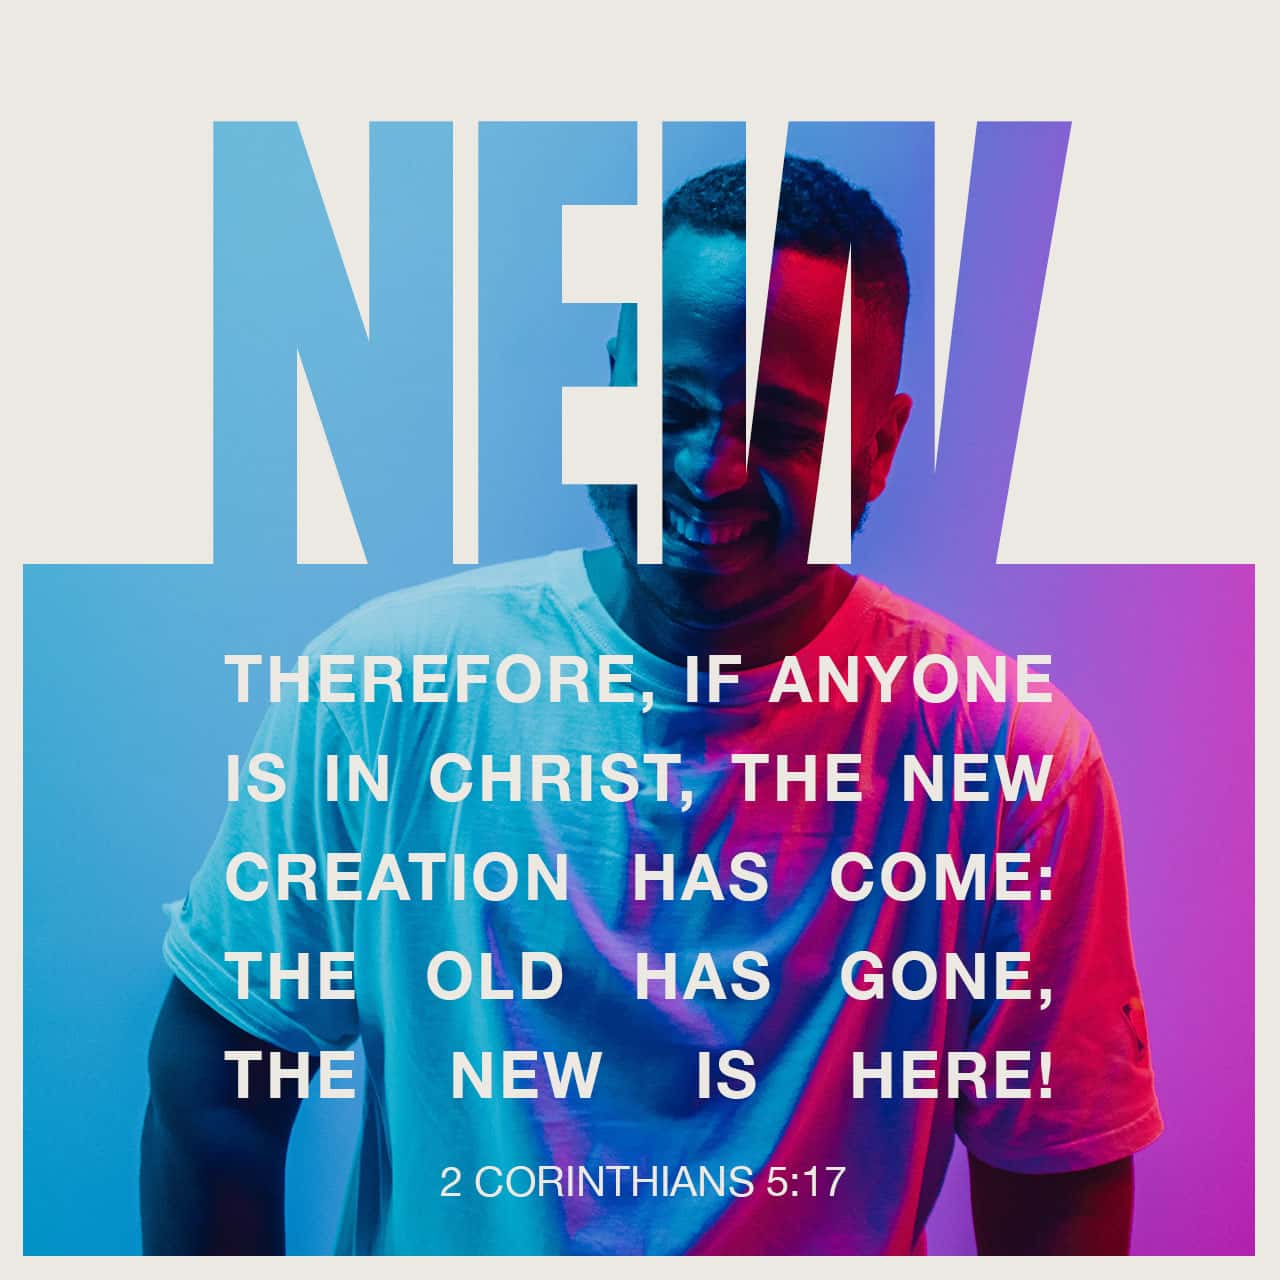 NEW THEREFORE, IF ANYONE IS IN CHRIST; THE NEW CREATION HAS COME: THE OLD HAS GONE, THE NEW IS HEREI 2 CORINTHIANS 5:17